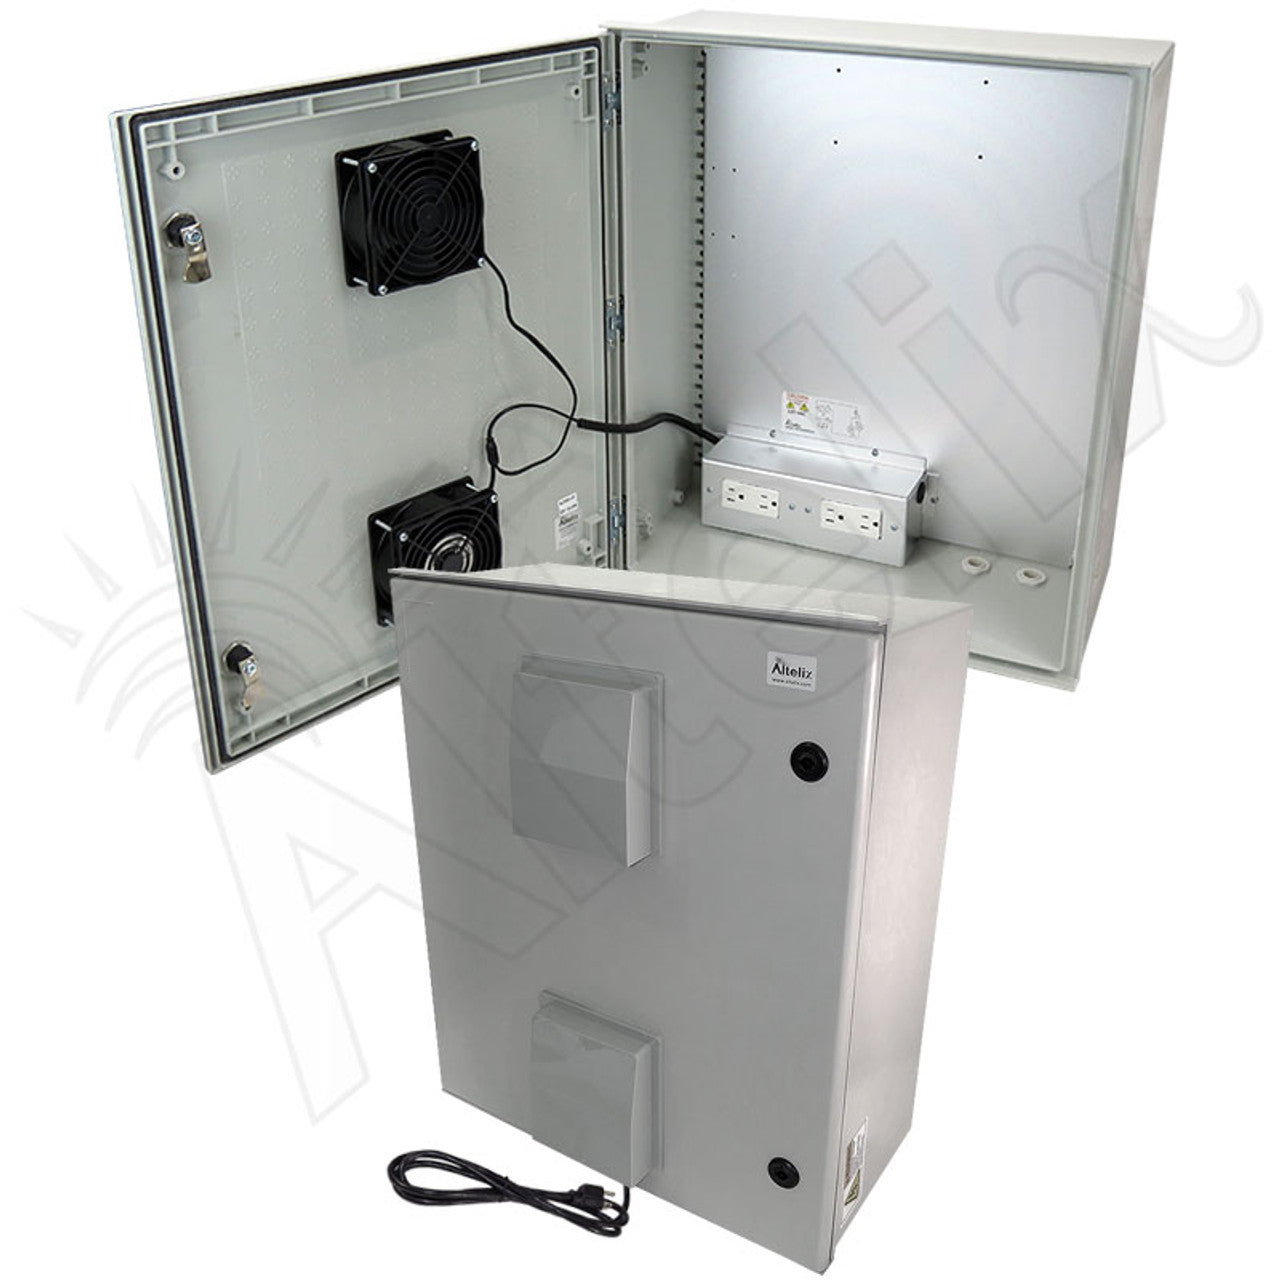 Altelix Vented Fiberglass Weatherproof NEMA Enclosure with 120 VAC Outlets, Power Cord, 200W Heater and 85°F Turn-On Cooling Fan